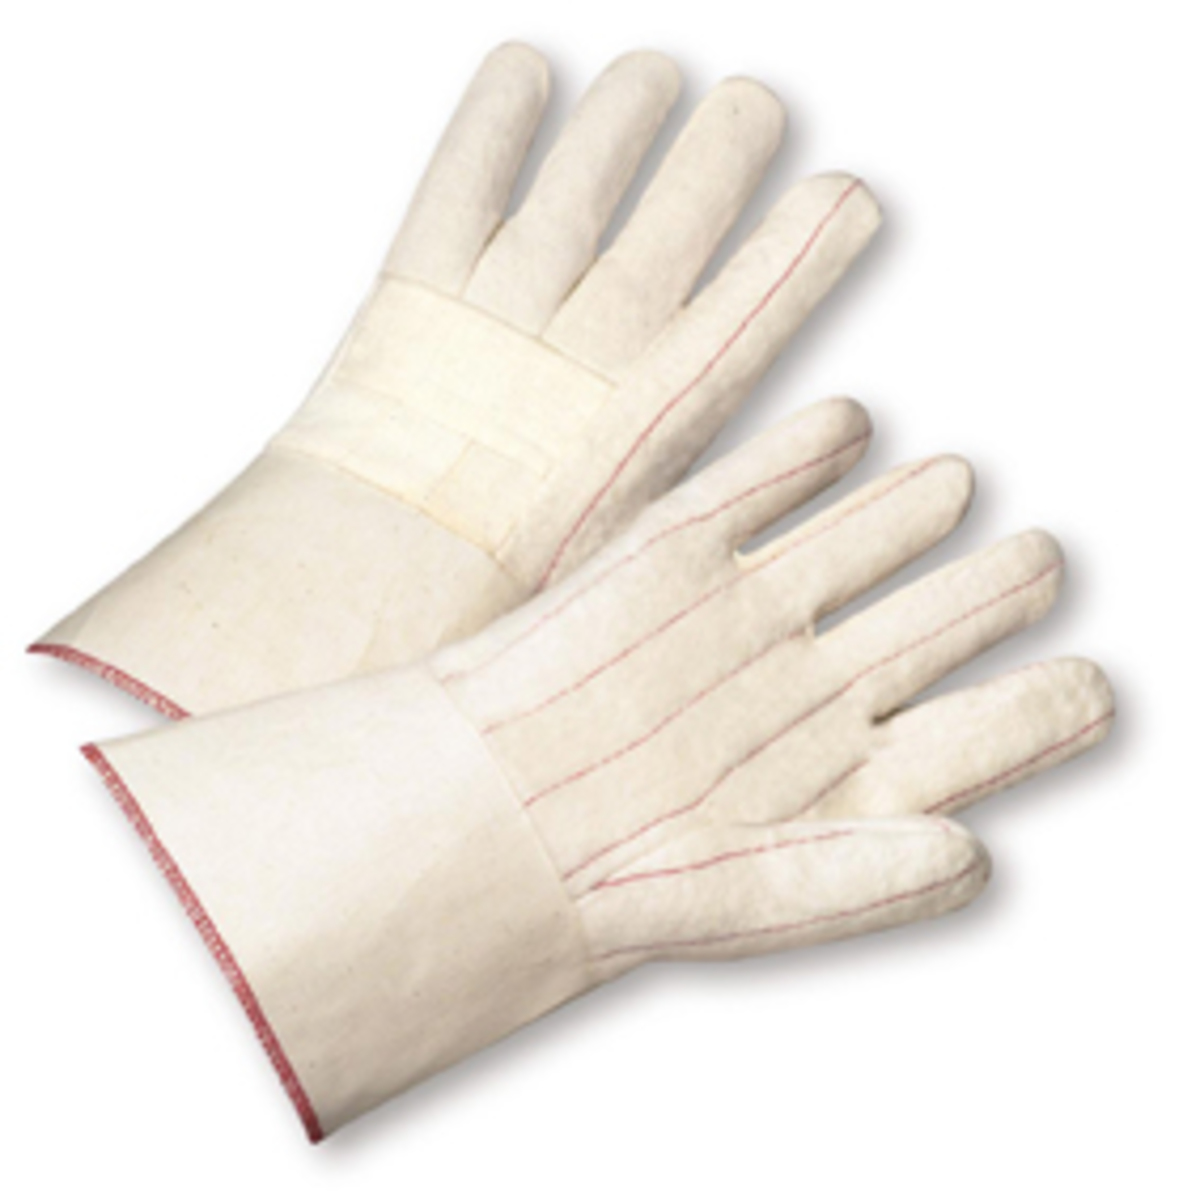 PIP® Large Natural Regular Weight Cotton Hot Mill Gloves With Gauntlet Cuff